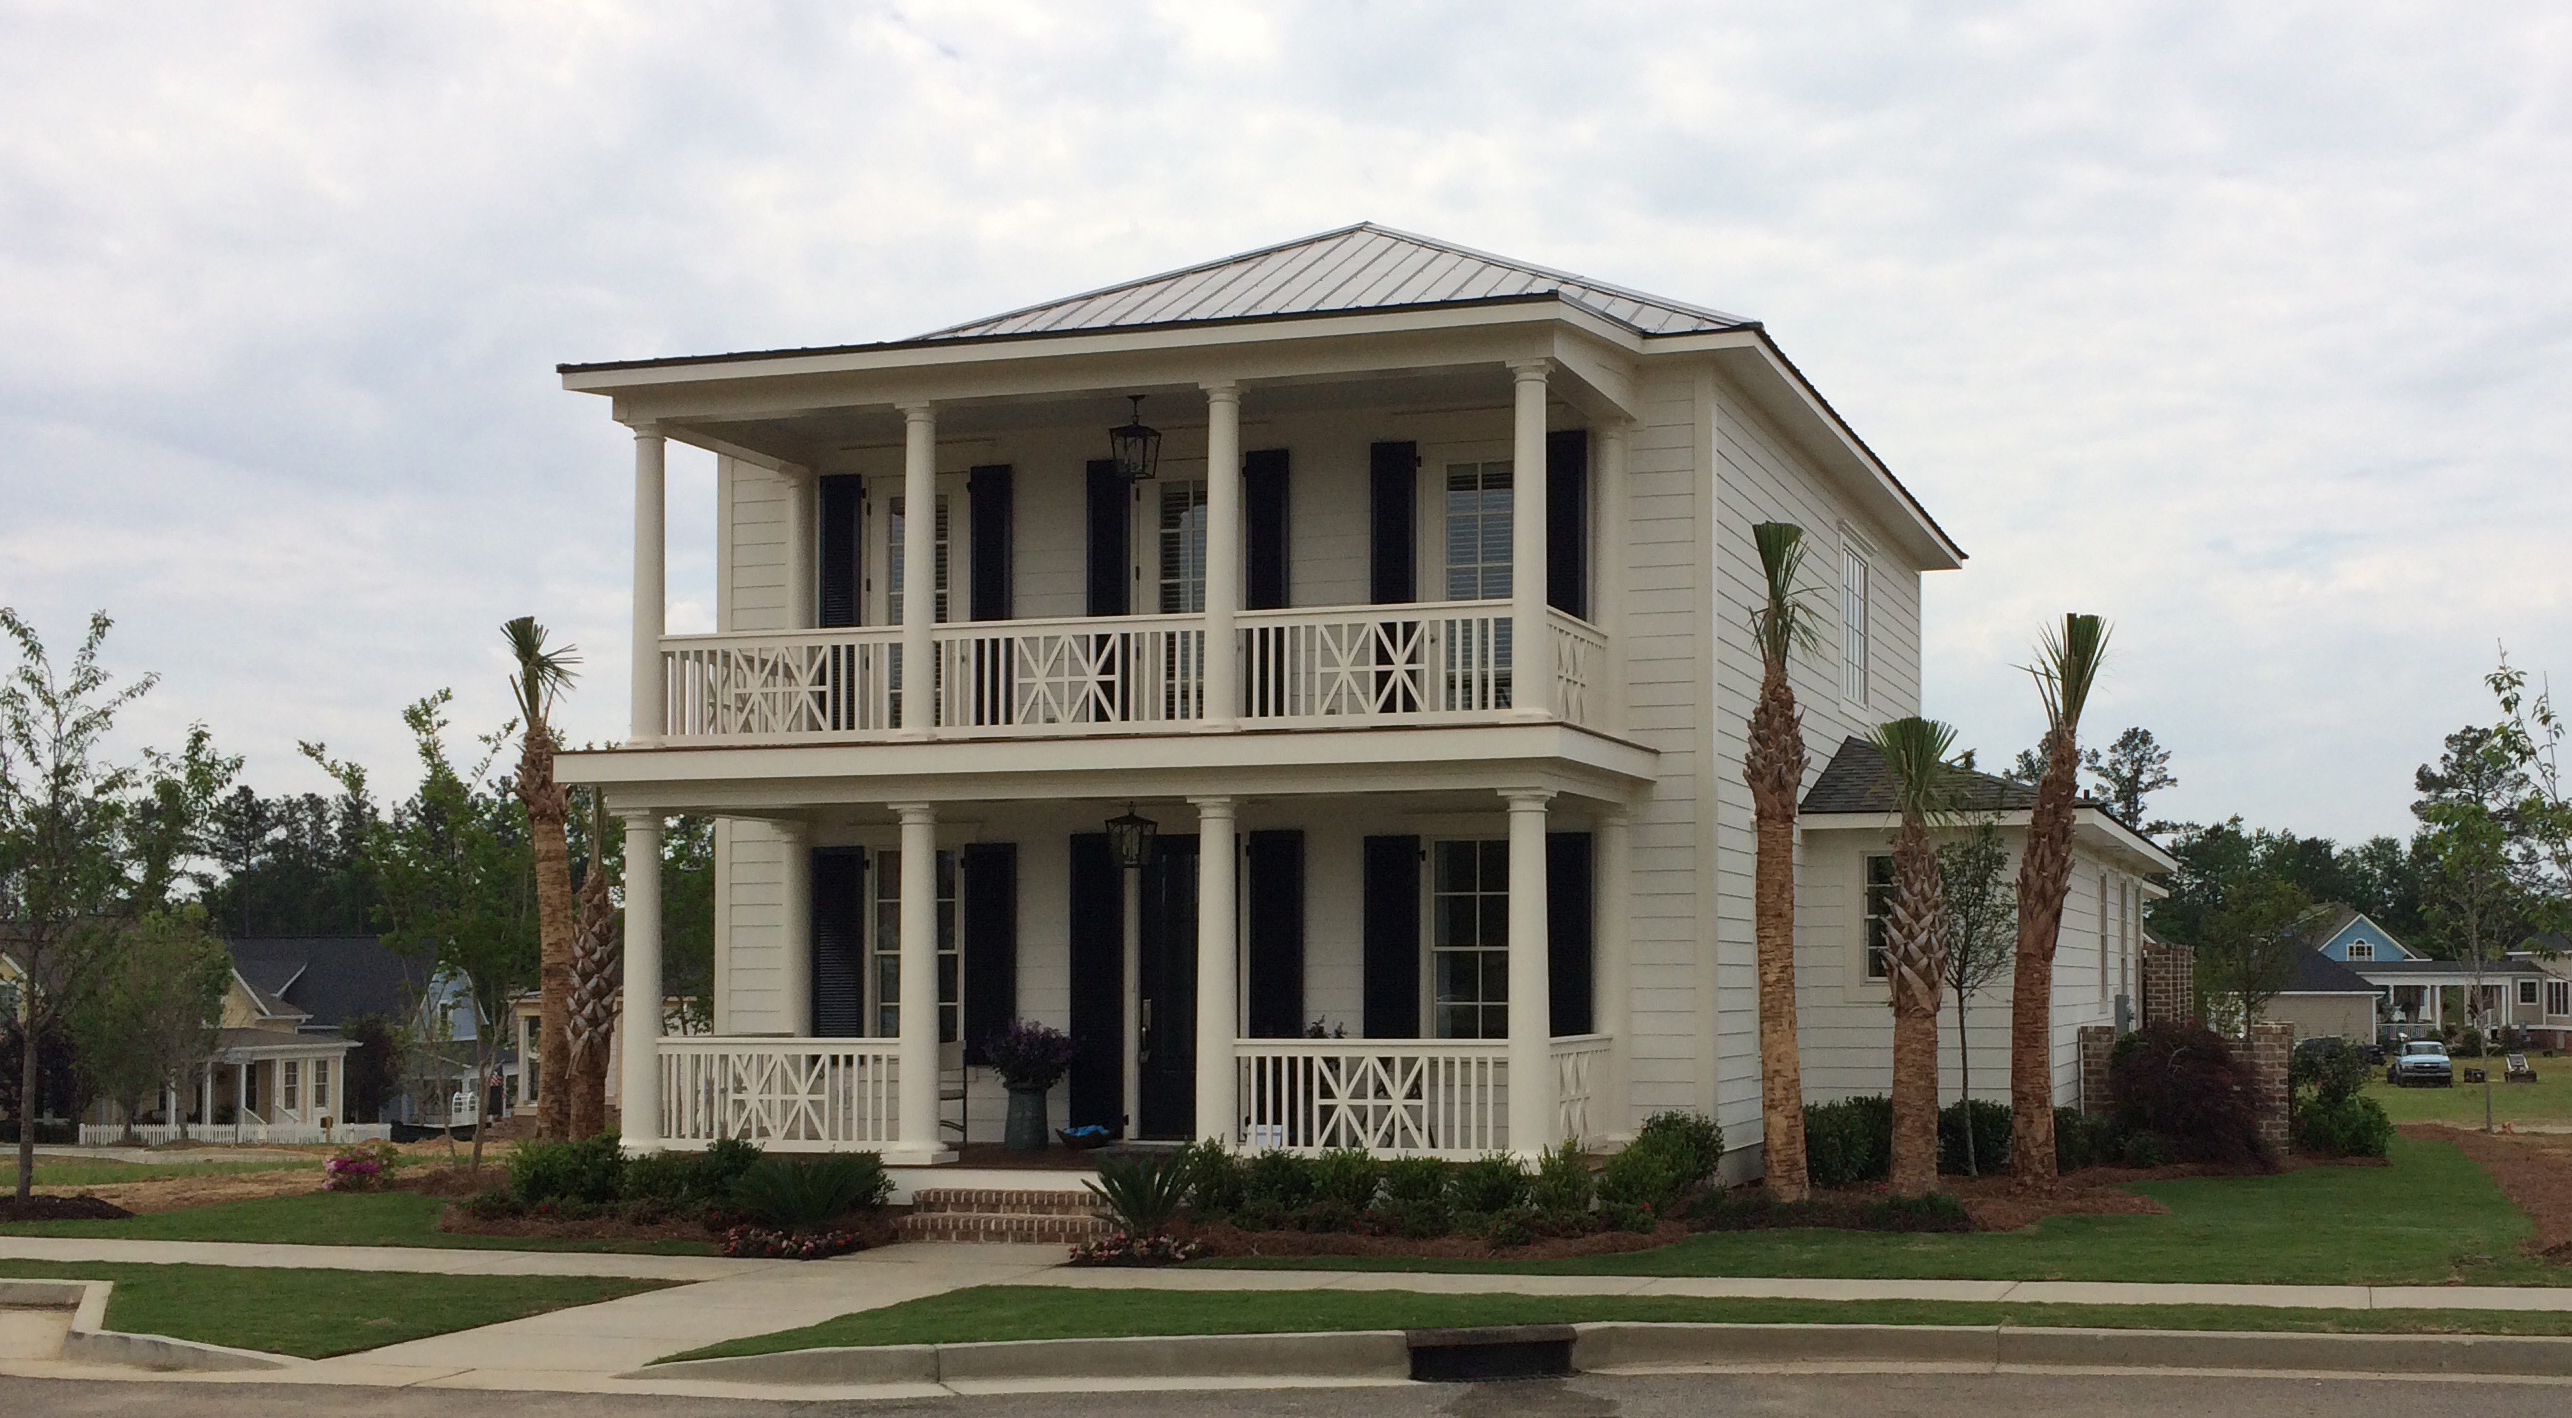 The Savannah home of the Village at Woodside is prepared for tours with a green TifTuf lawn.